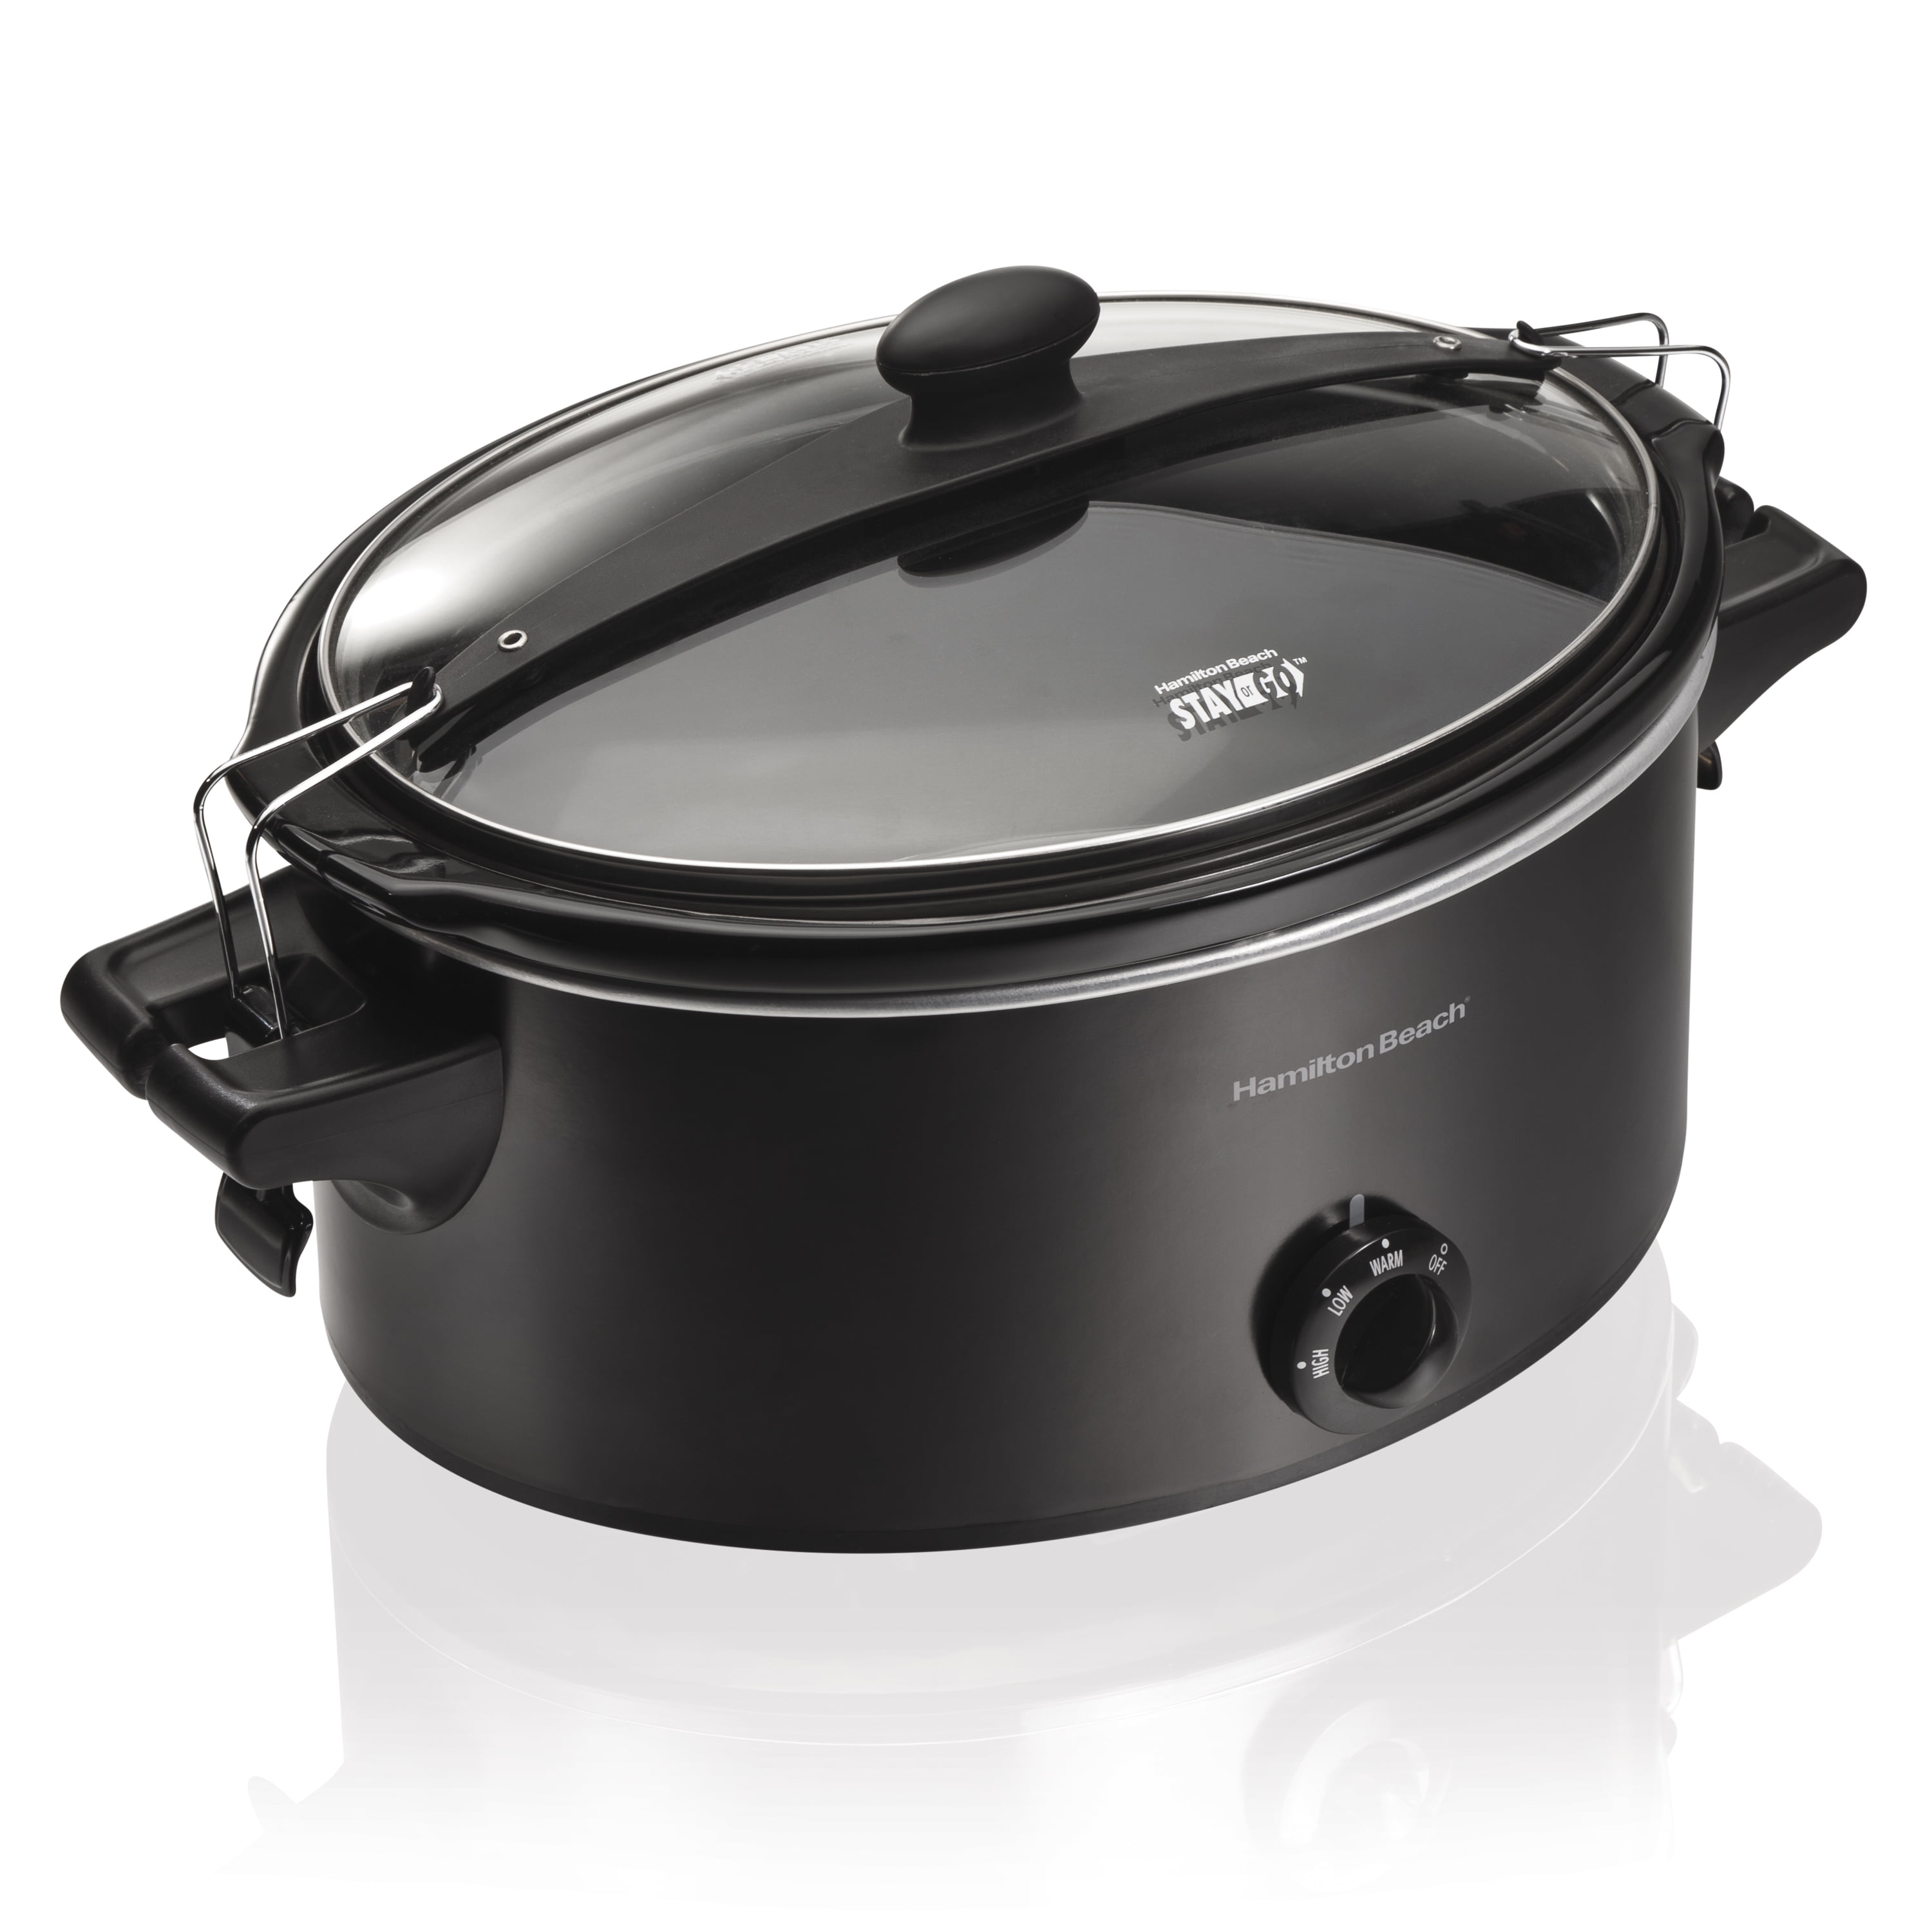 Hamilton Beach Stay or Go 6 Quart Slow Cooker in Stainless Steel 33162 - Hamilton  Beach Slow Cooker